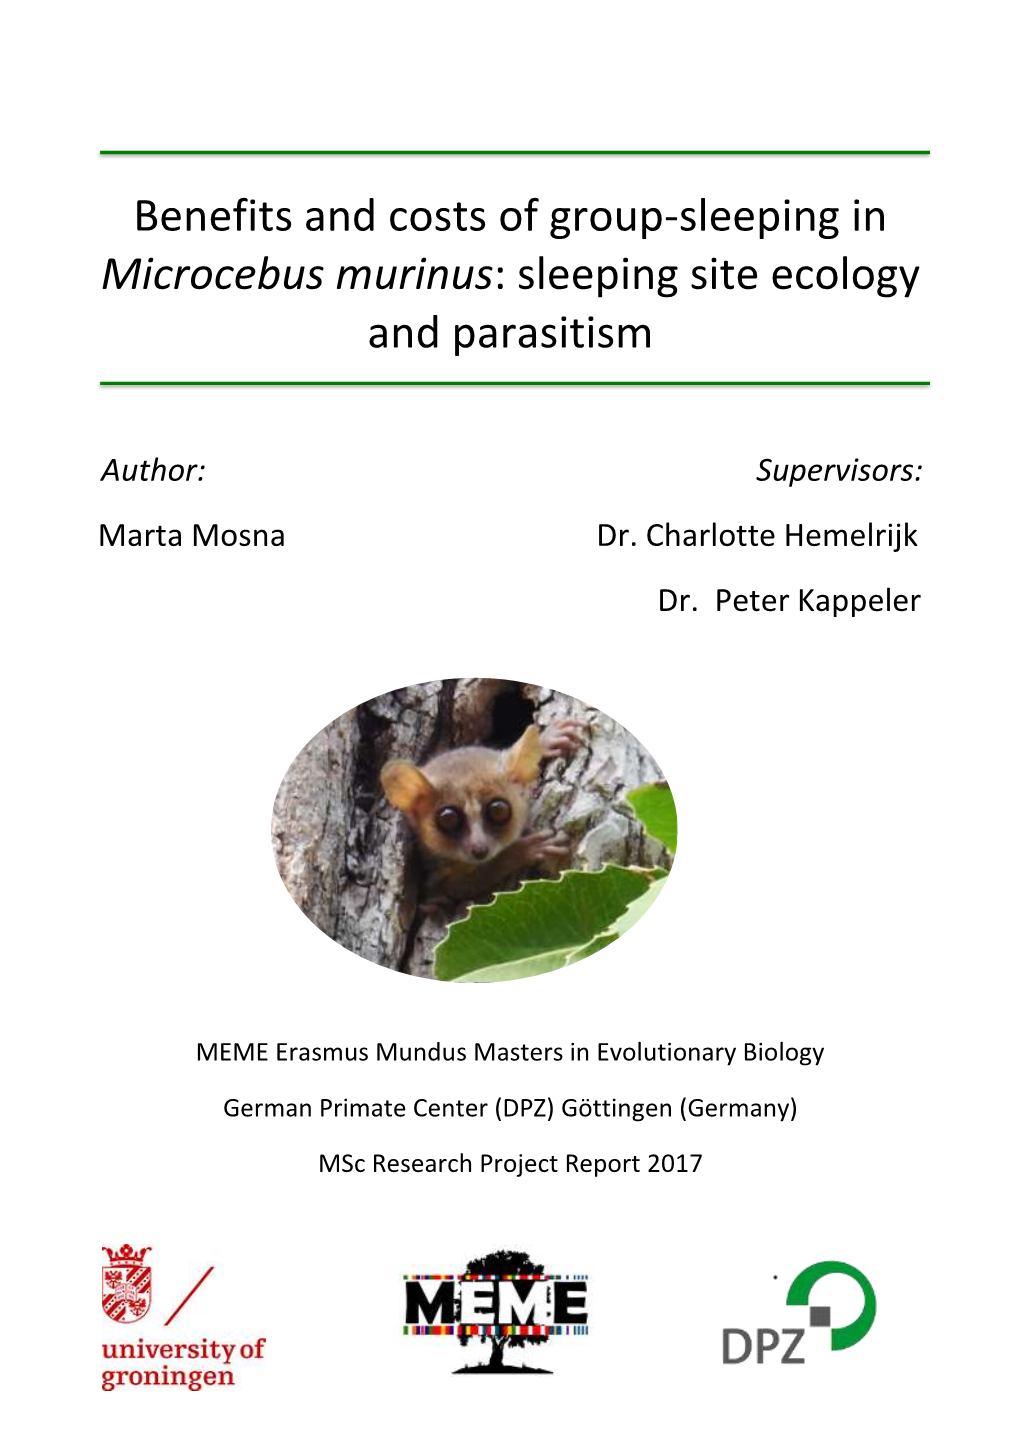 Benefits and Costs of Group-Sleeping in Microcebus Murinus: Sleeping Site Ecology and Parasitism